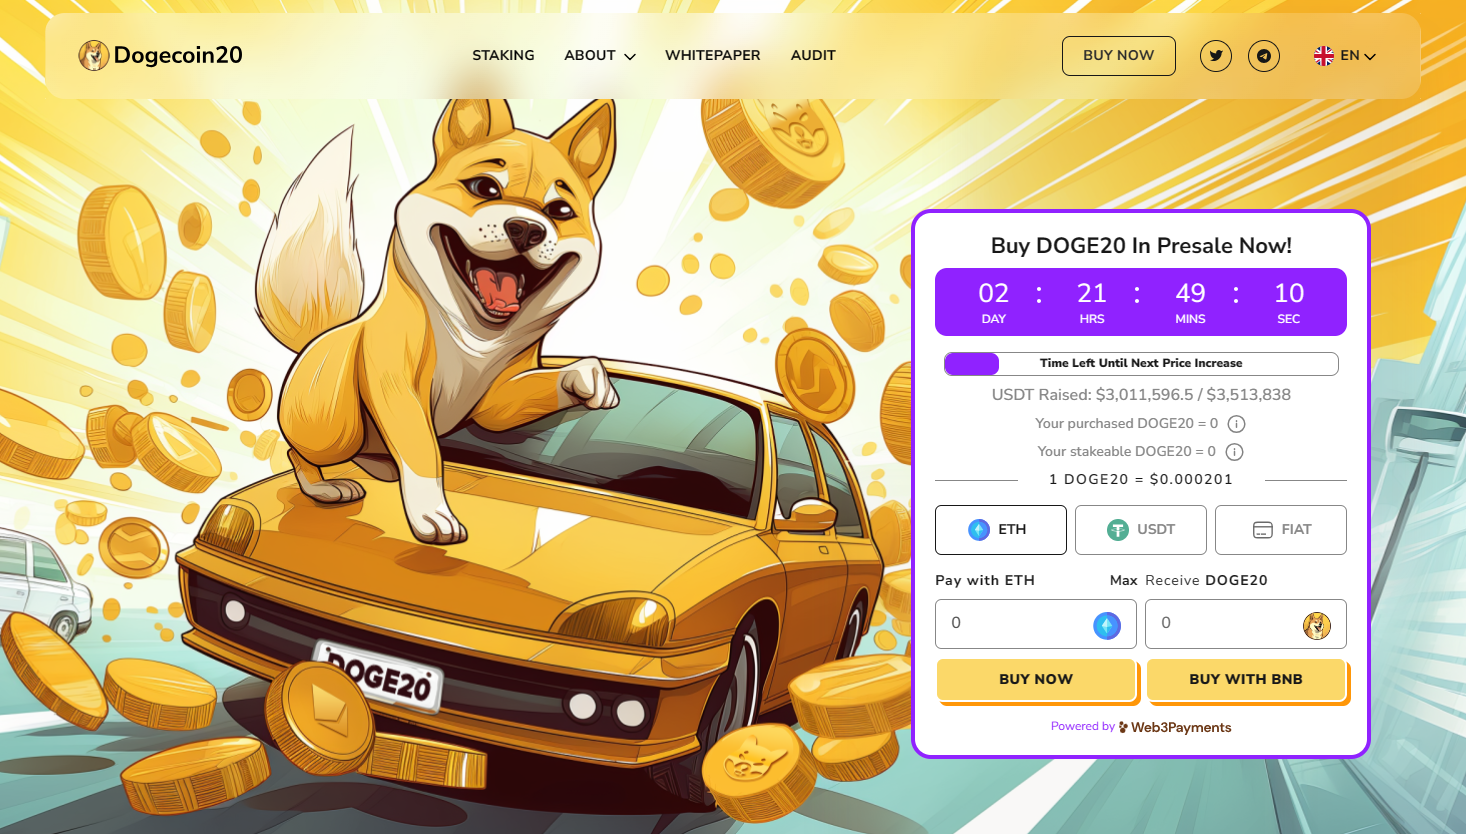 dogecoin20 presale most promising crypto